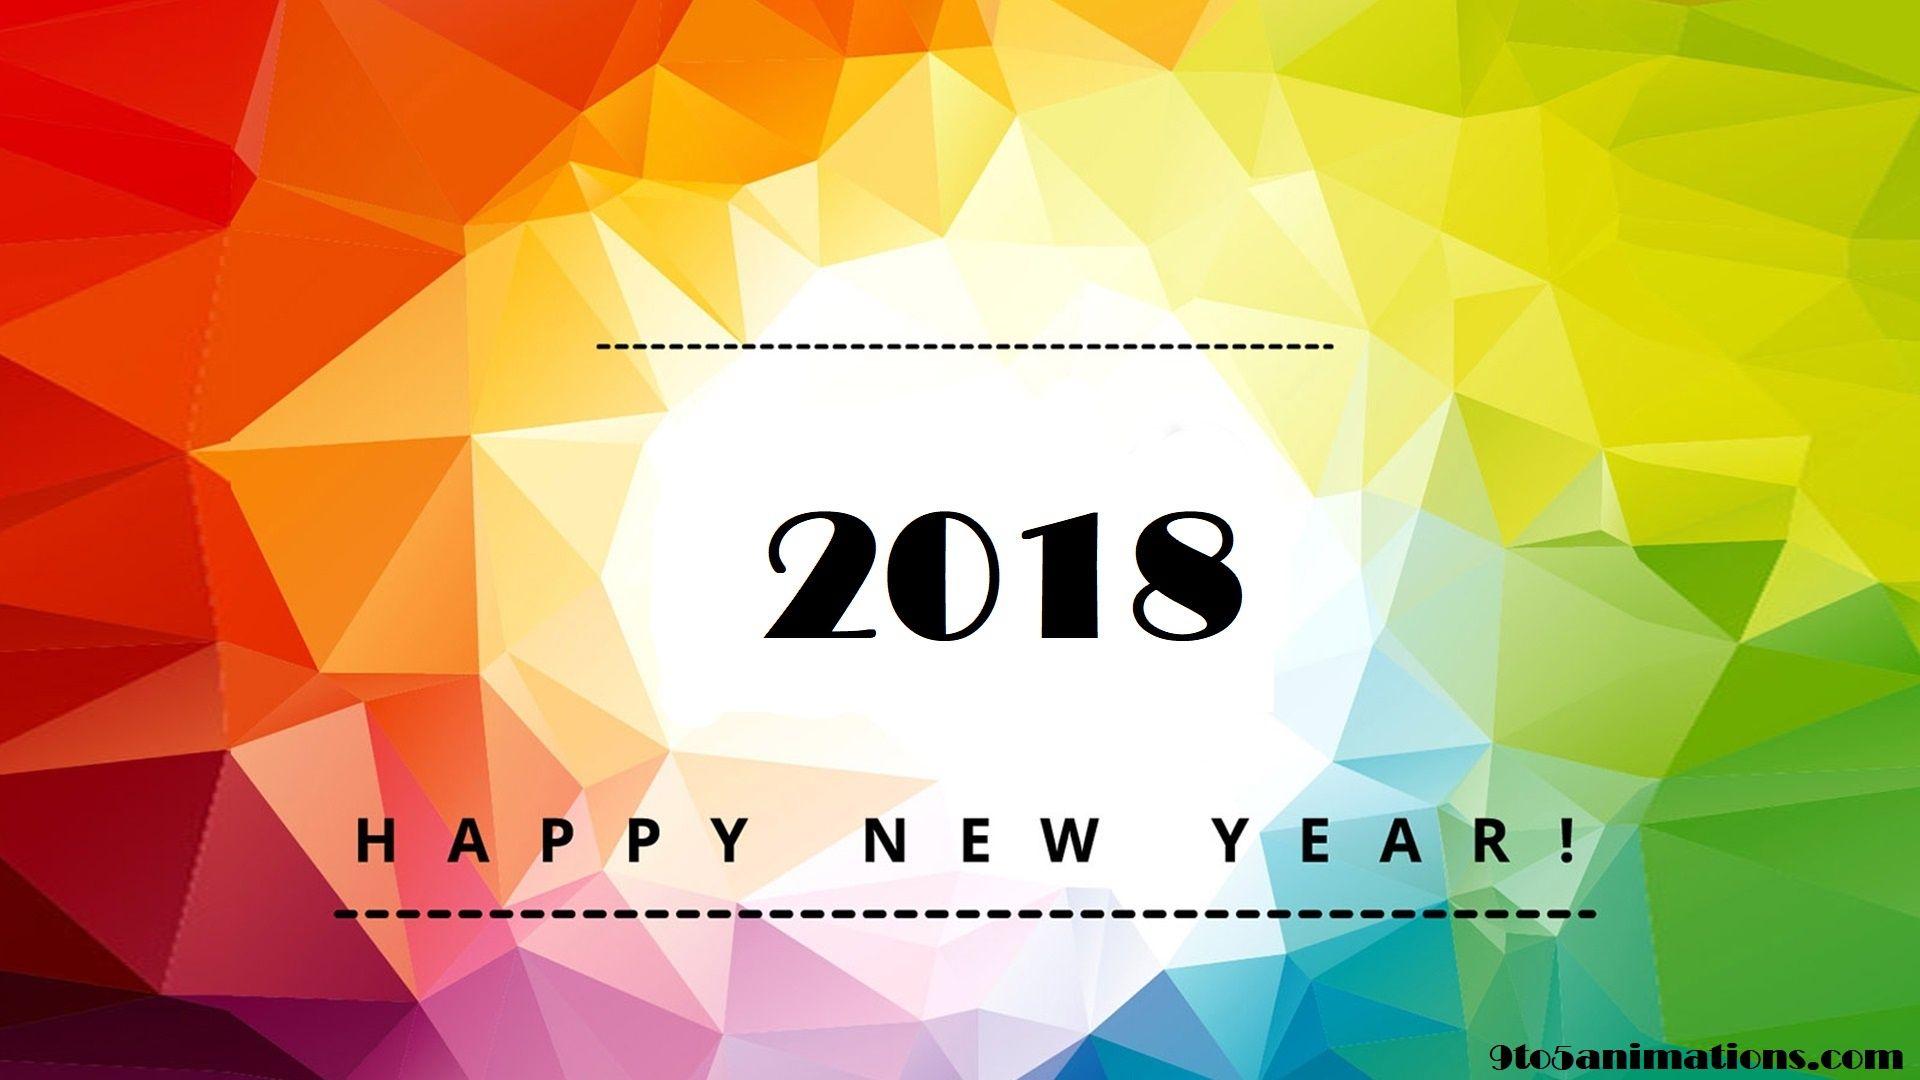 Happy New Year 2018 Colorful Wallpaper HDTo5Animations.Com